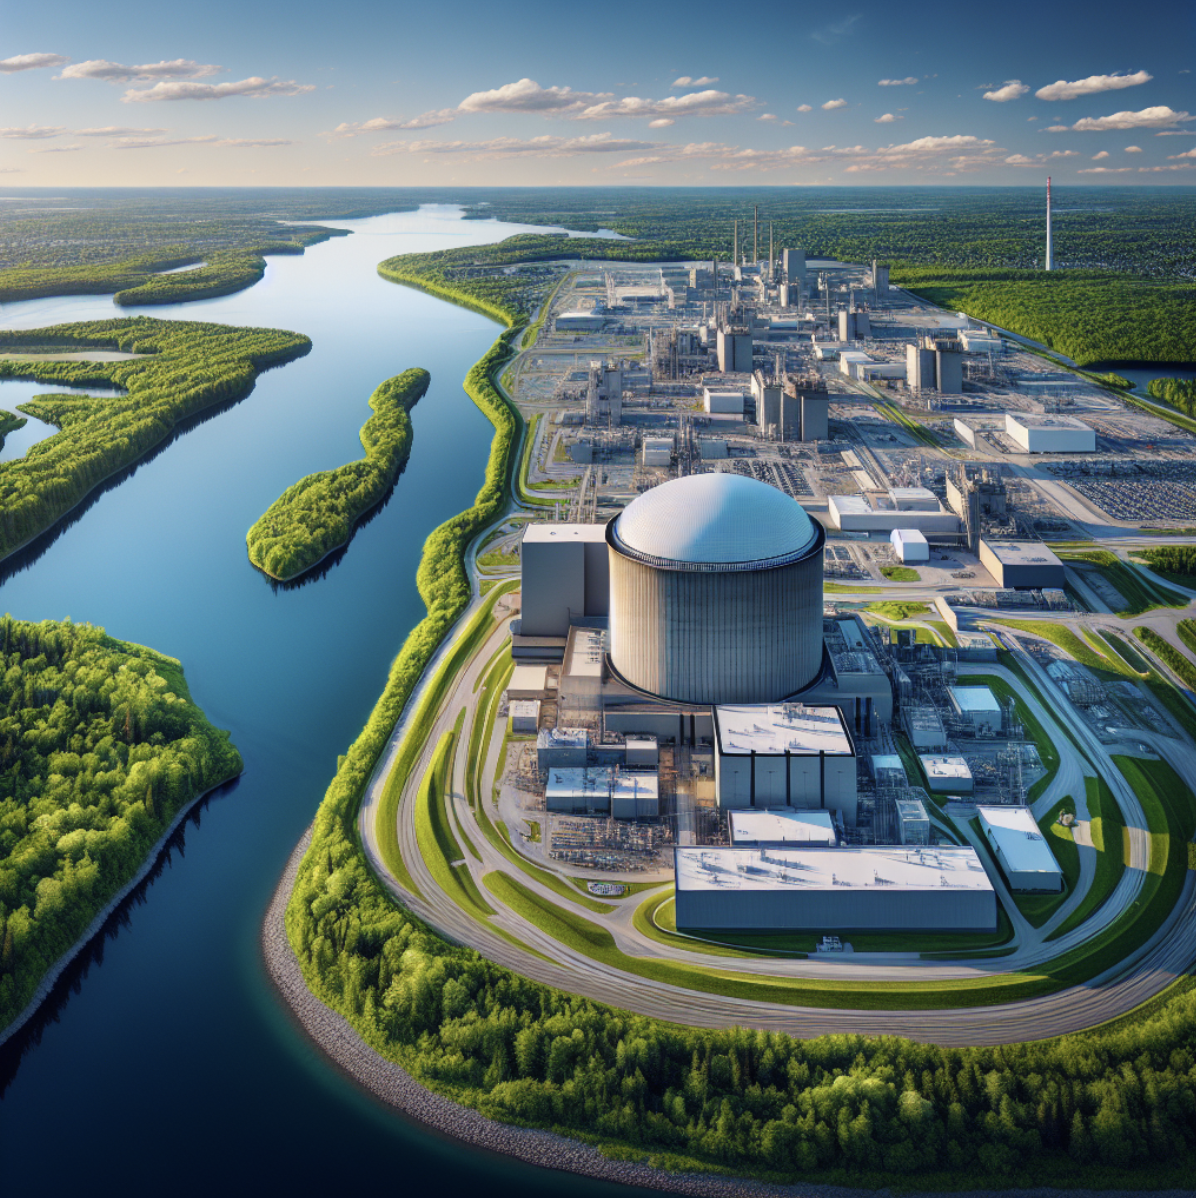 AI-generated image of a Canadian nuclear power plant, illustrating the advanced infrastructure surrounded by lush green landscapes, highlighting Canada's nuclear industry overview.